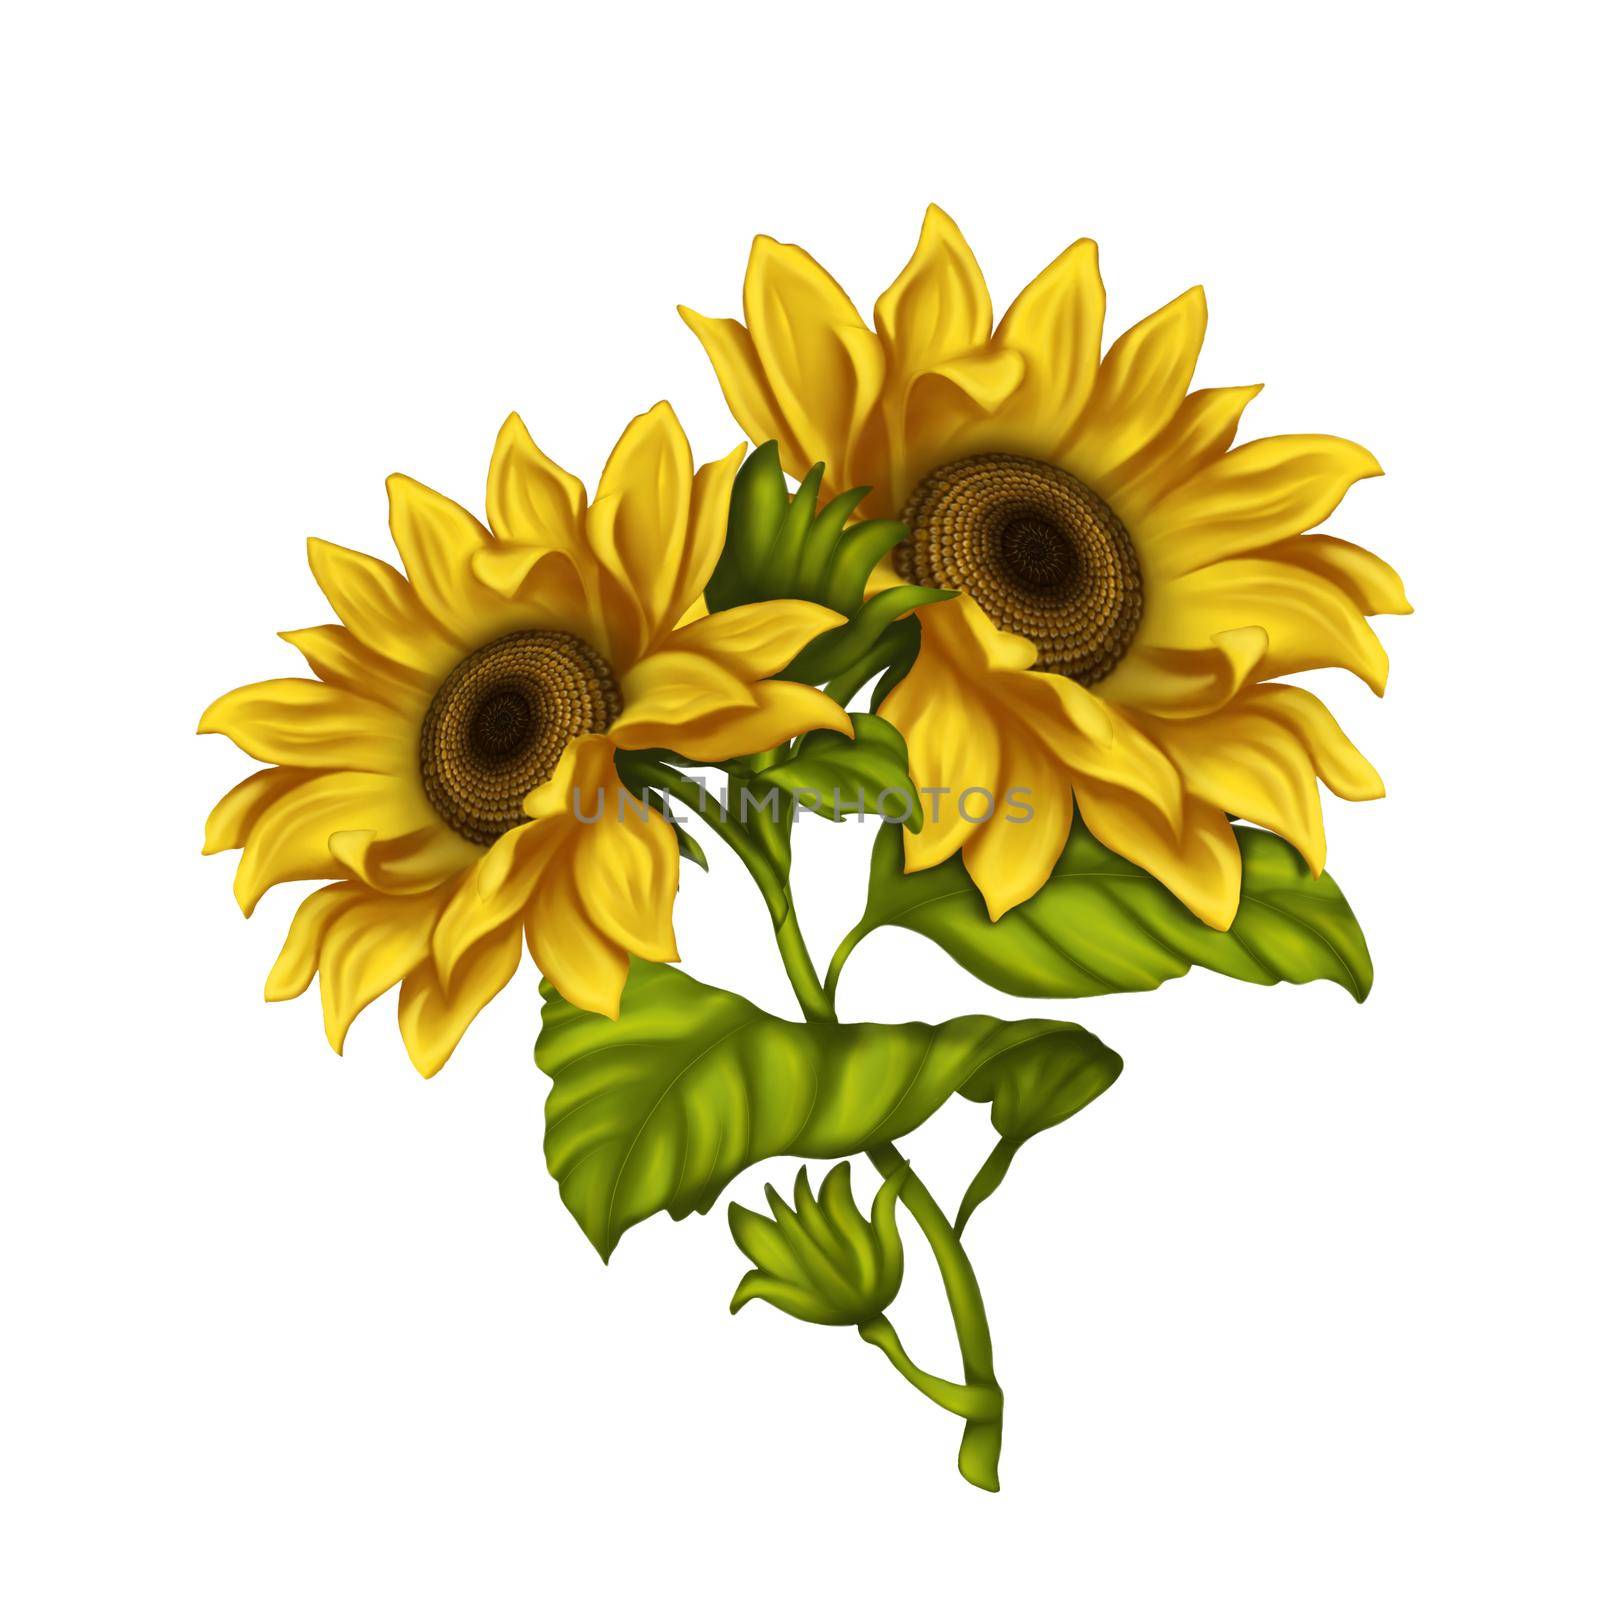 Clipart sunflowers on a white background. Illustration of sunflower flowers. Bright flowers on a light background.  by Alina_Lebed